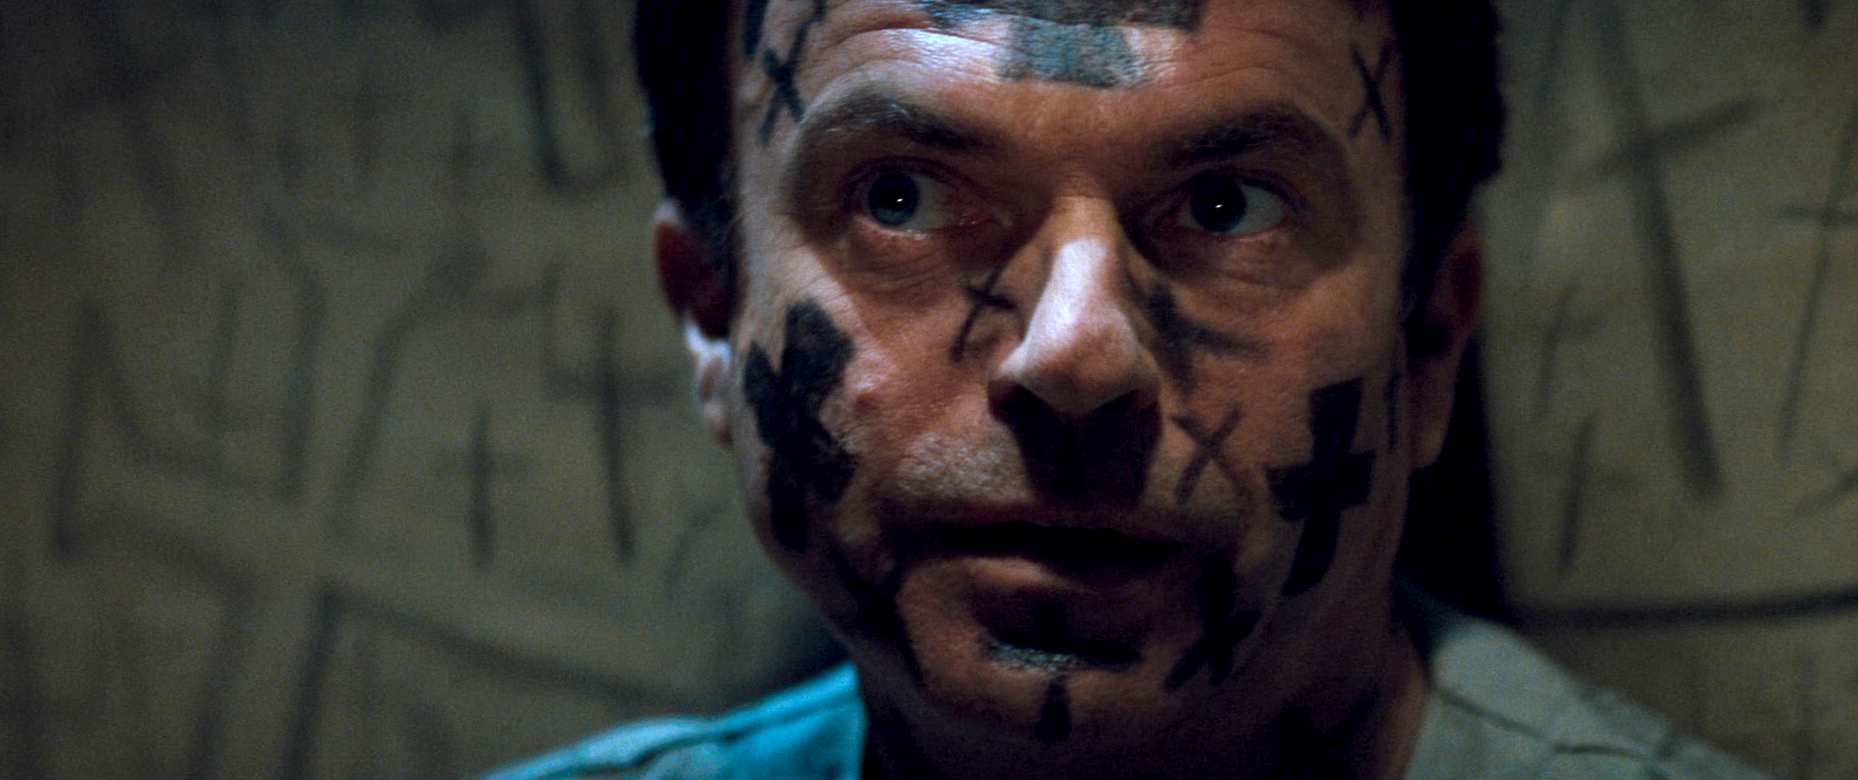 Sam Neill is having a very bad time in In the Mouth of Madness, with crosses sharpied on his face.